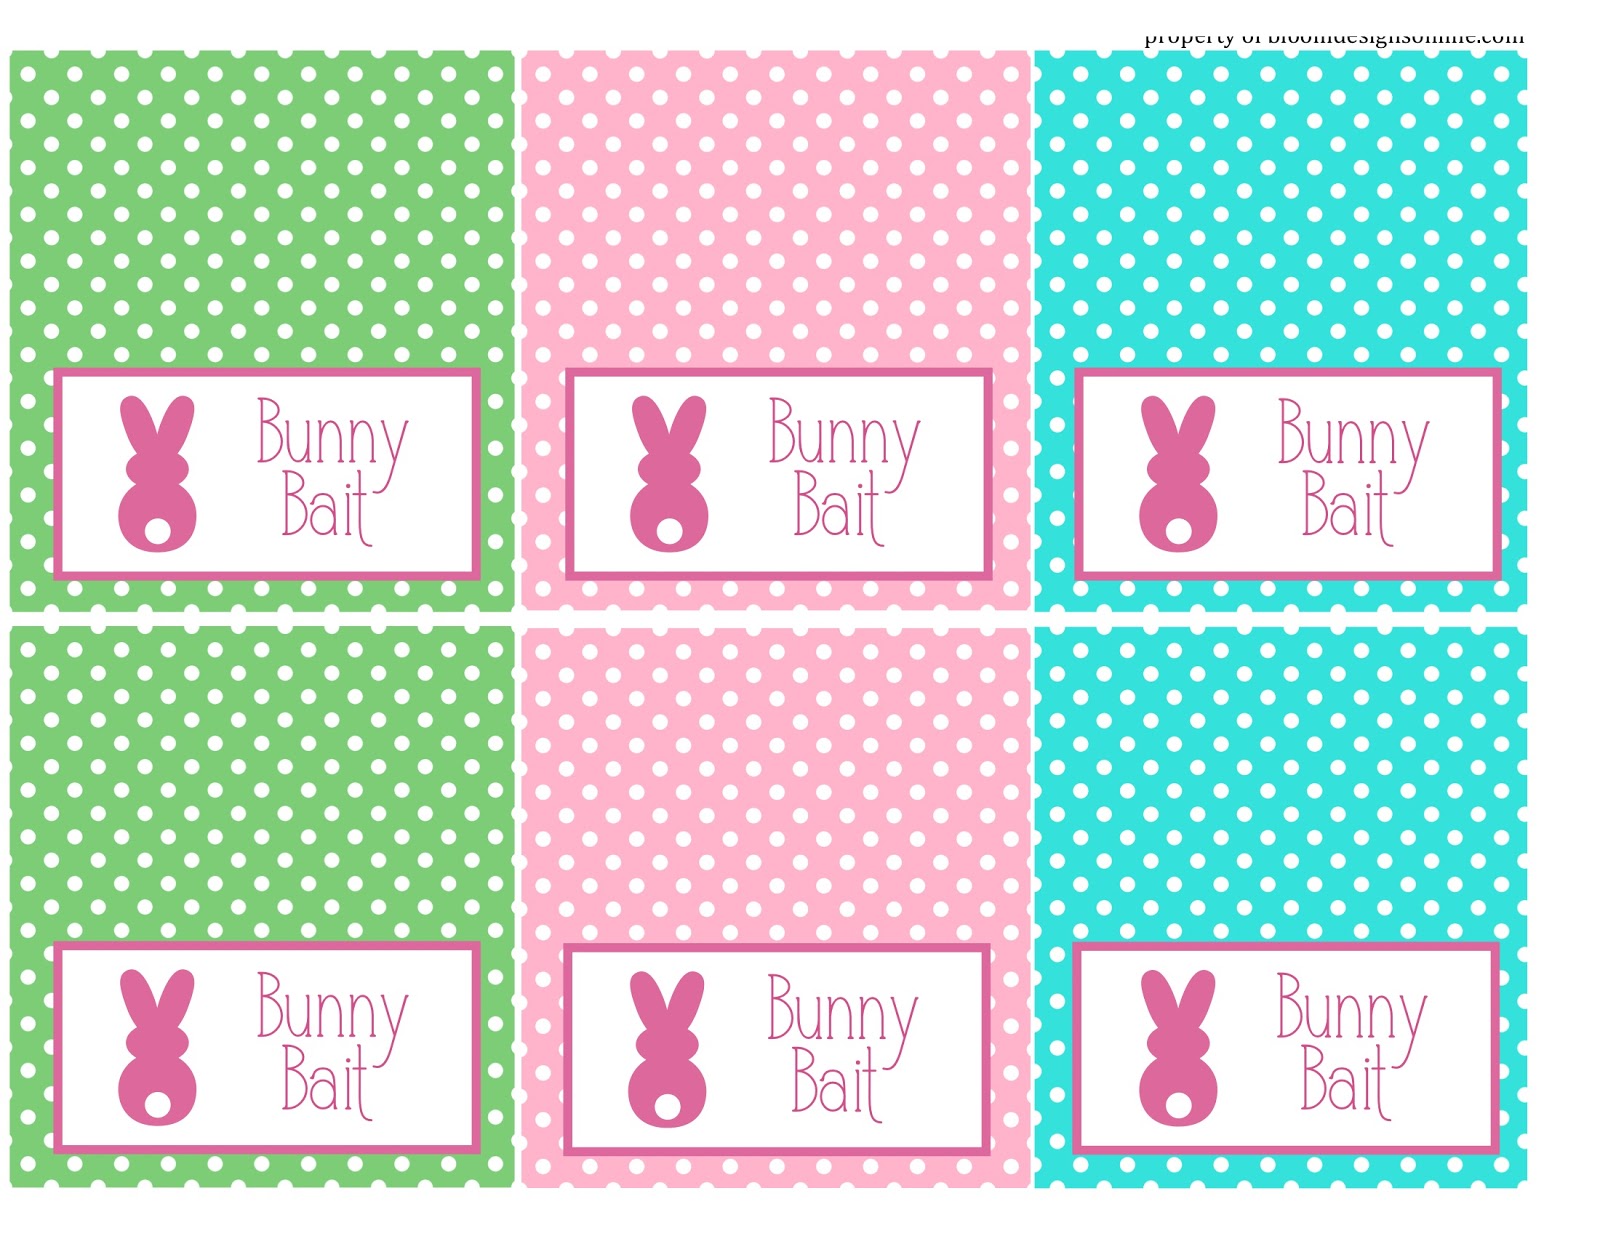 bloom-designs-free-bunny-bait-tags